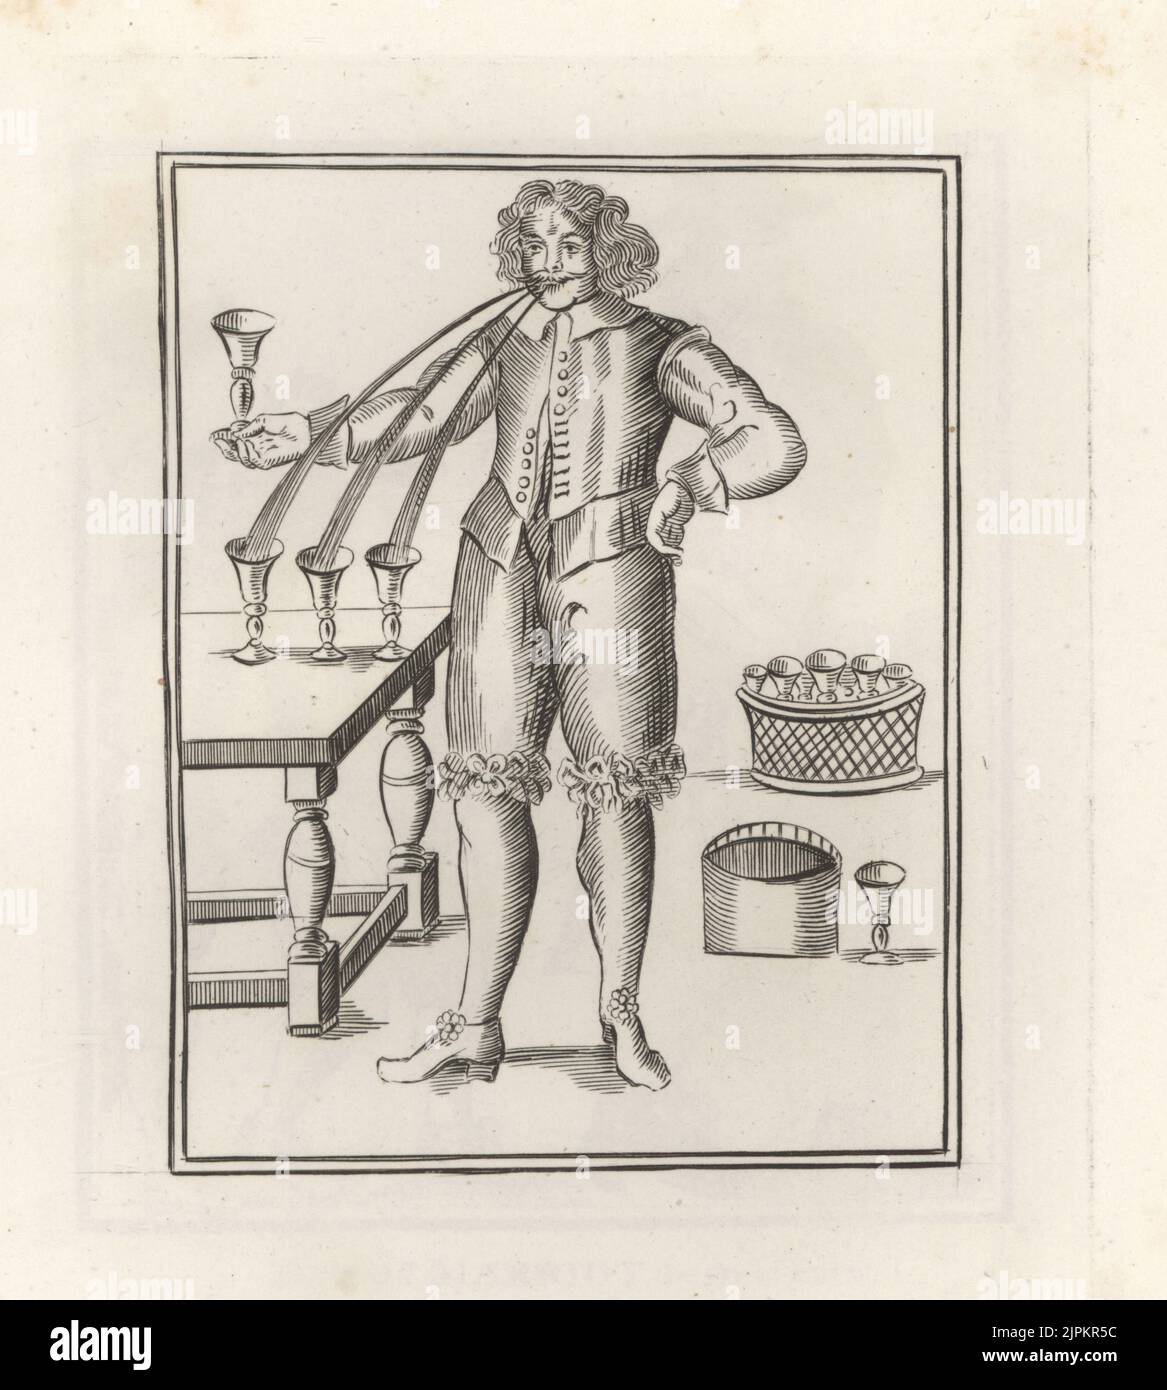 Floram Marchand, the Water Spouter. French entertainer from Tours who drank water and vomited wine (red, burgundy, white). Brought to London in 1650 to perform. Floram Marchand, juggler and water spouter. From a rare woodcut.Copperplate engraving from Samuel Woodburn’s Gallery of Rare Portraits Consisting of Original Plates, George Jones, 102 St Martin’s Lane, London, 1816. Stock Photo